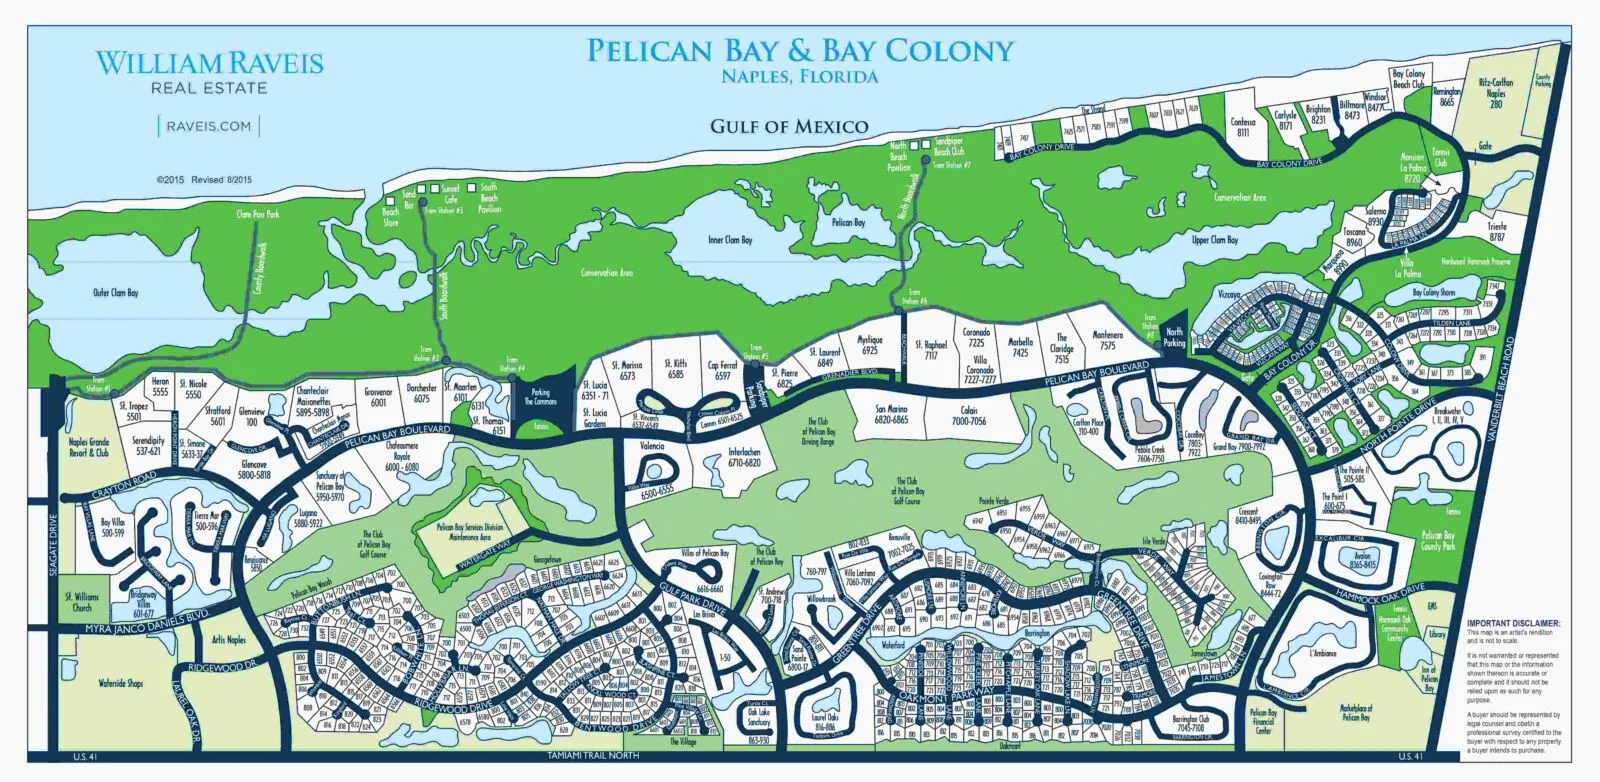 Pelican Bay and Bay Colony Map 